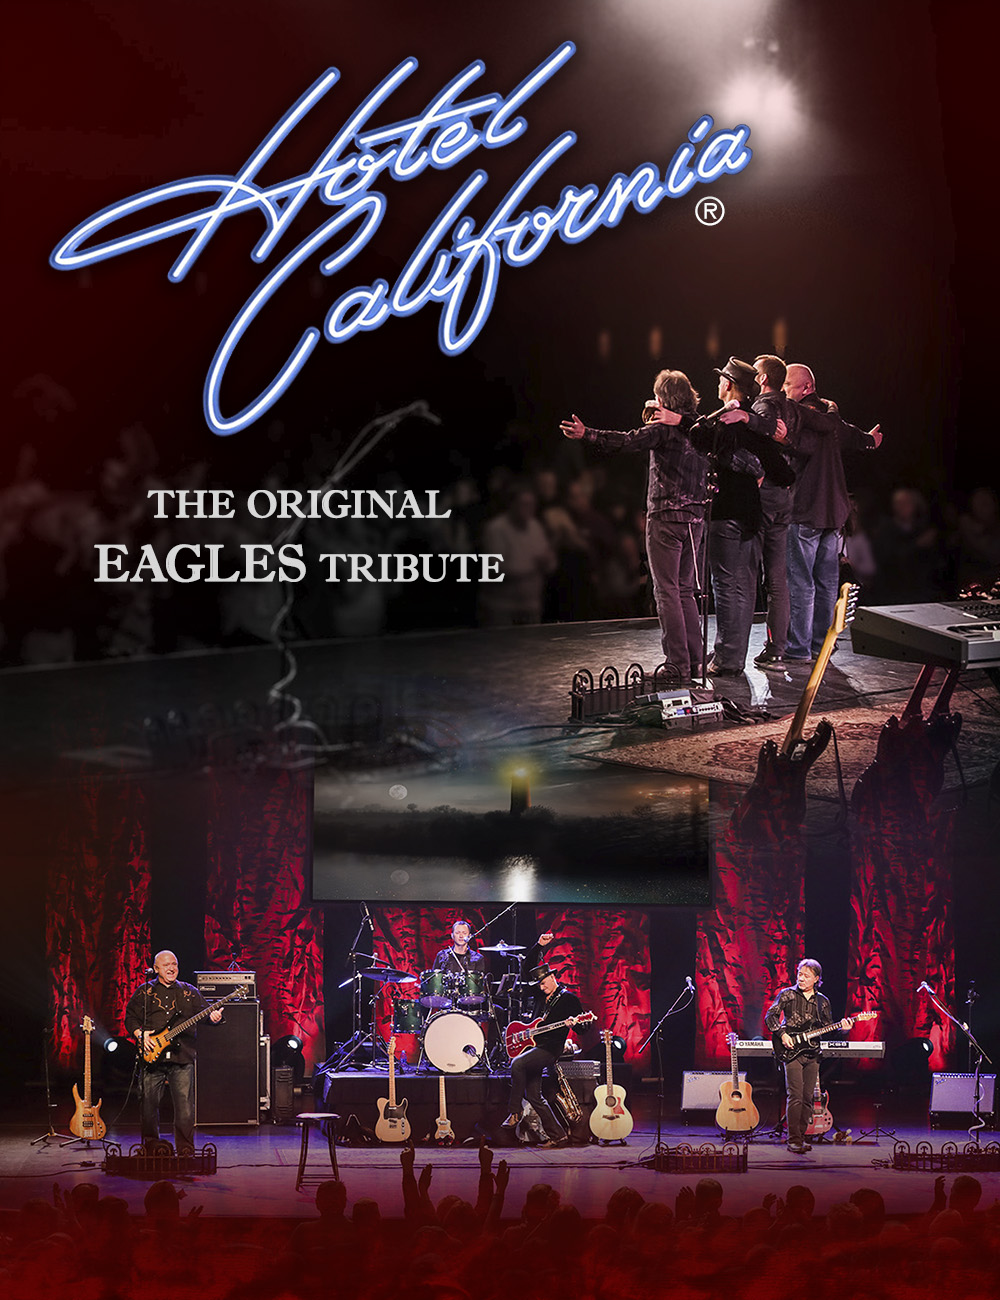 Poster Reading "Hotel California, the original Eagles Tribute". Shows images of band performing at a concert hall